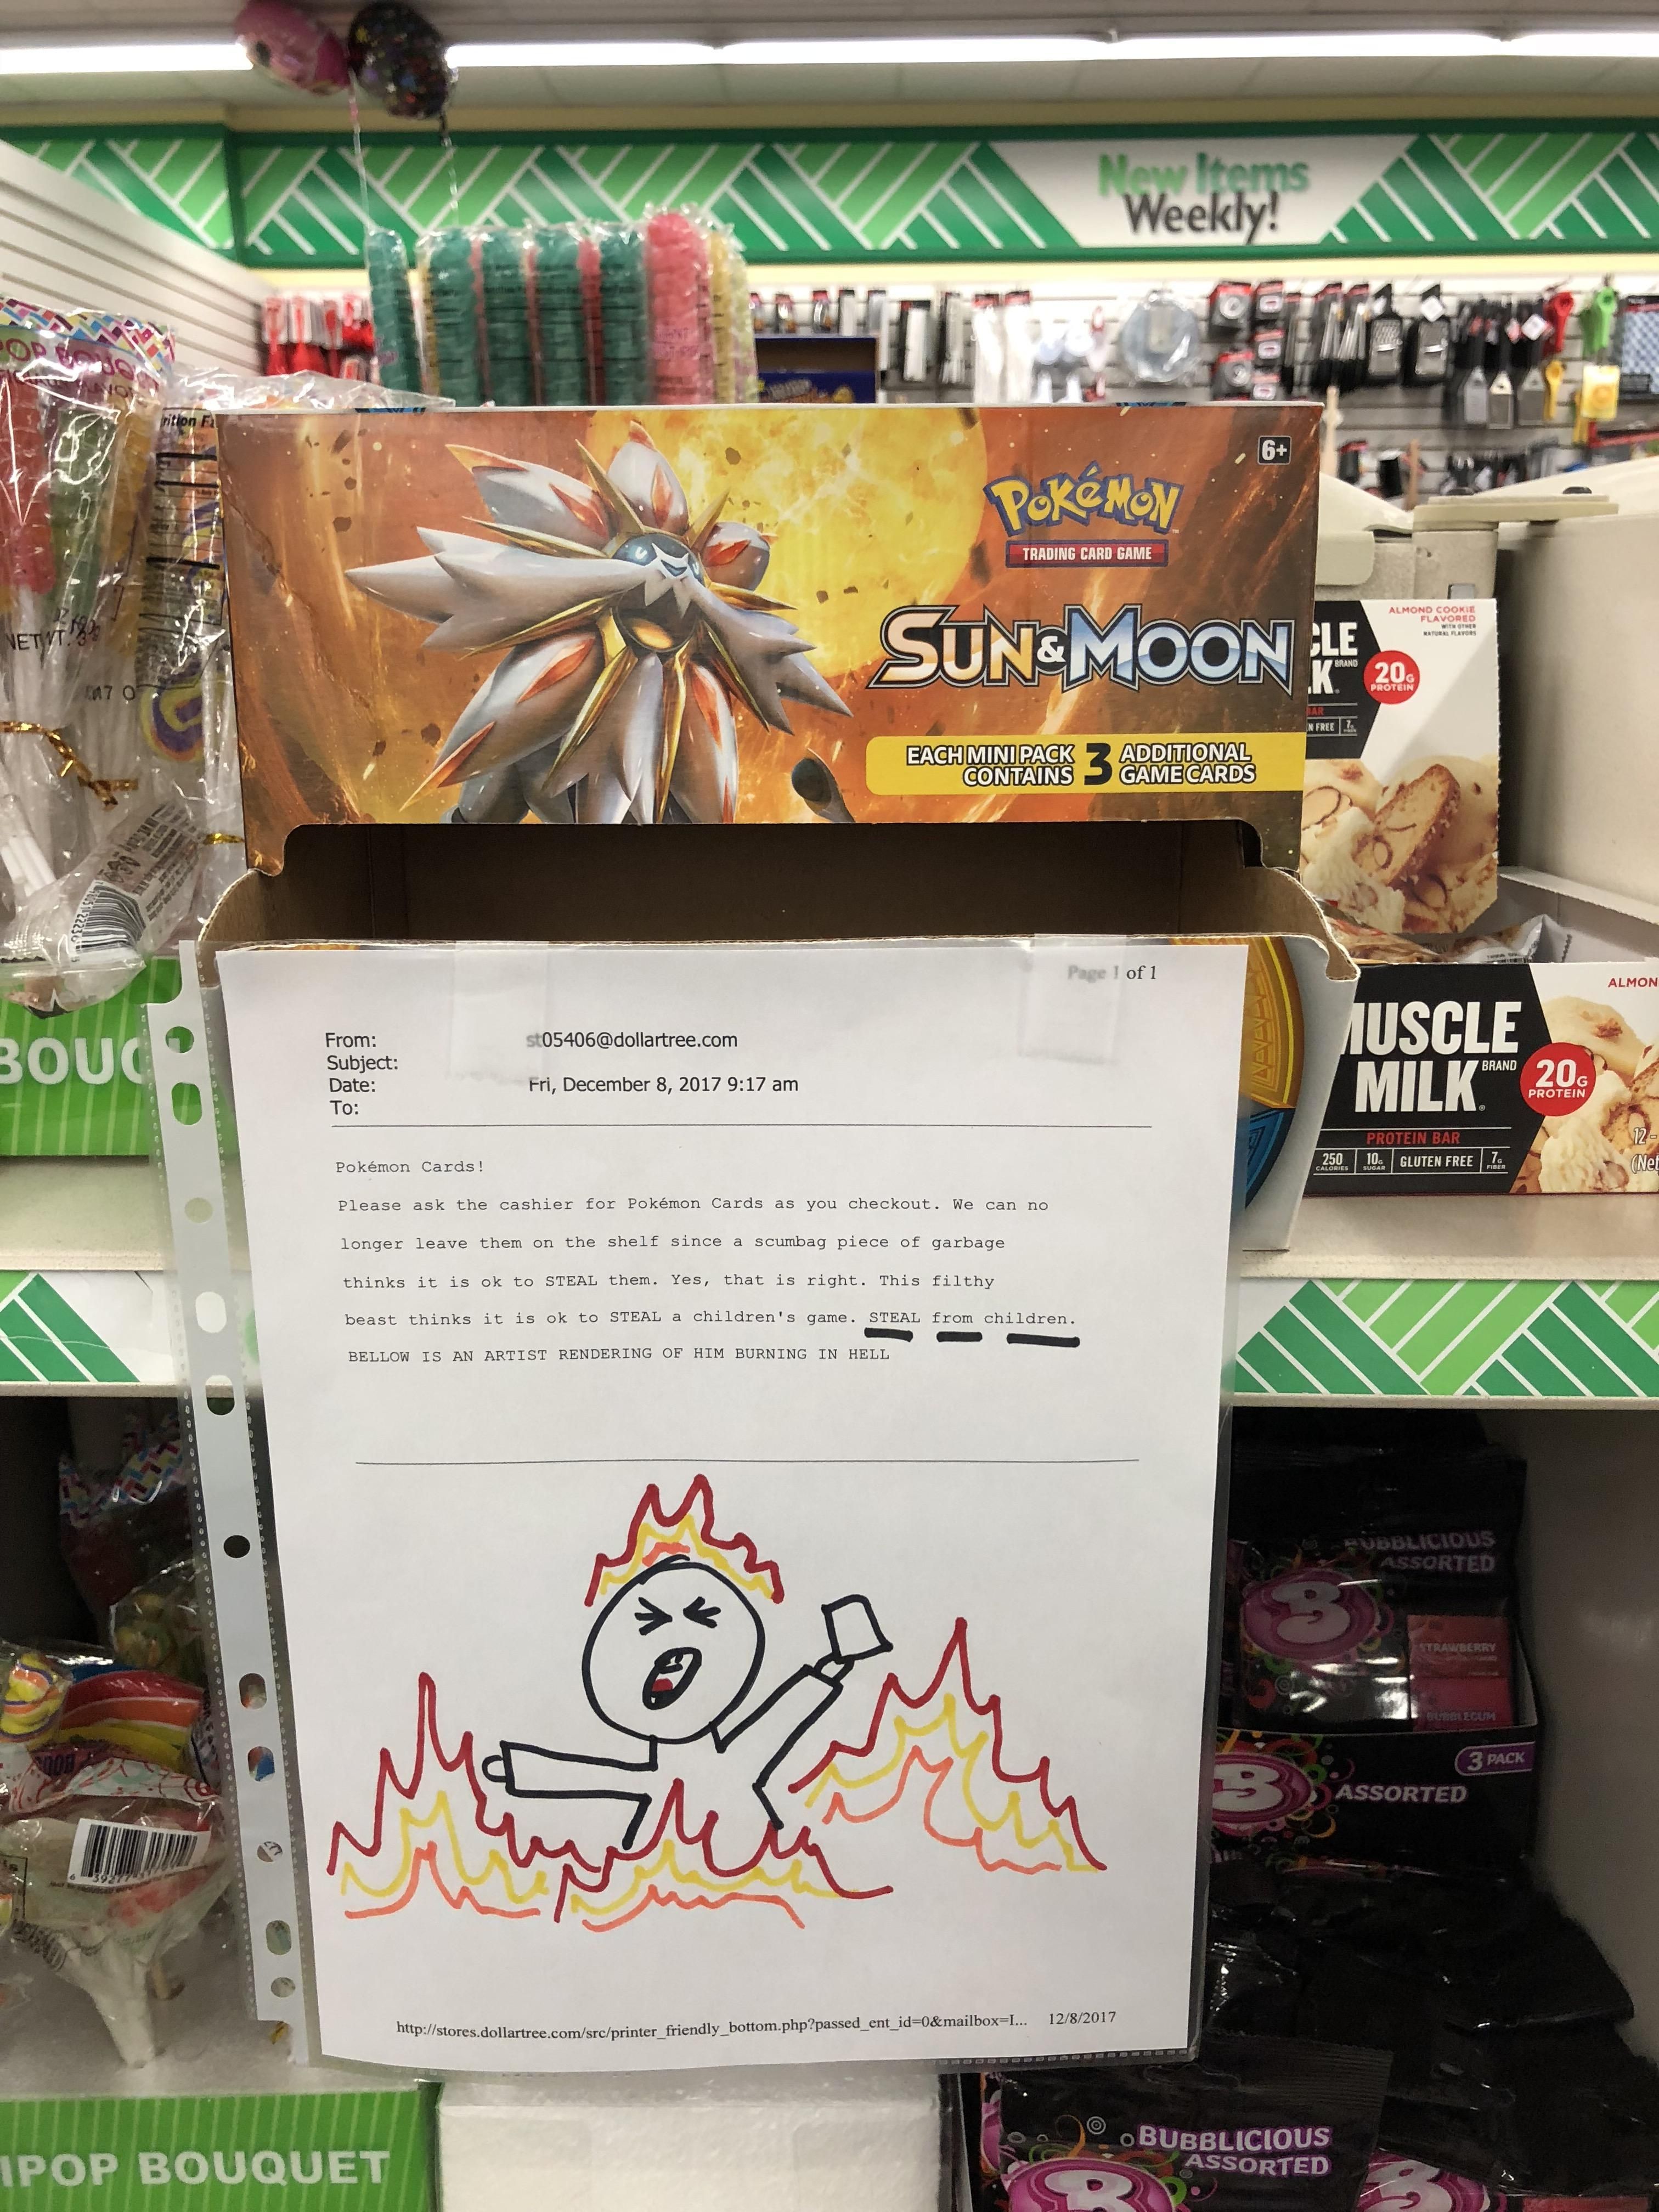 Someone has been stealing Pokémon cards at our Dollar Tree and the manager posted this in response: